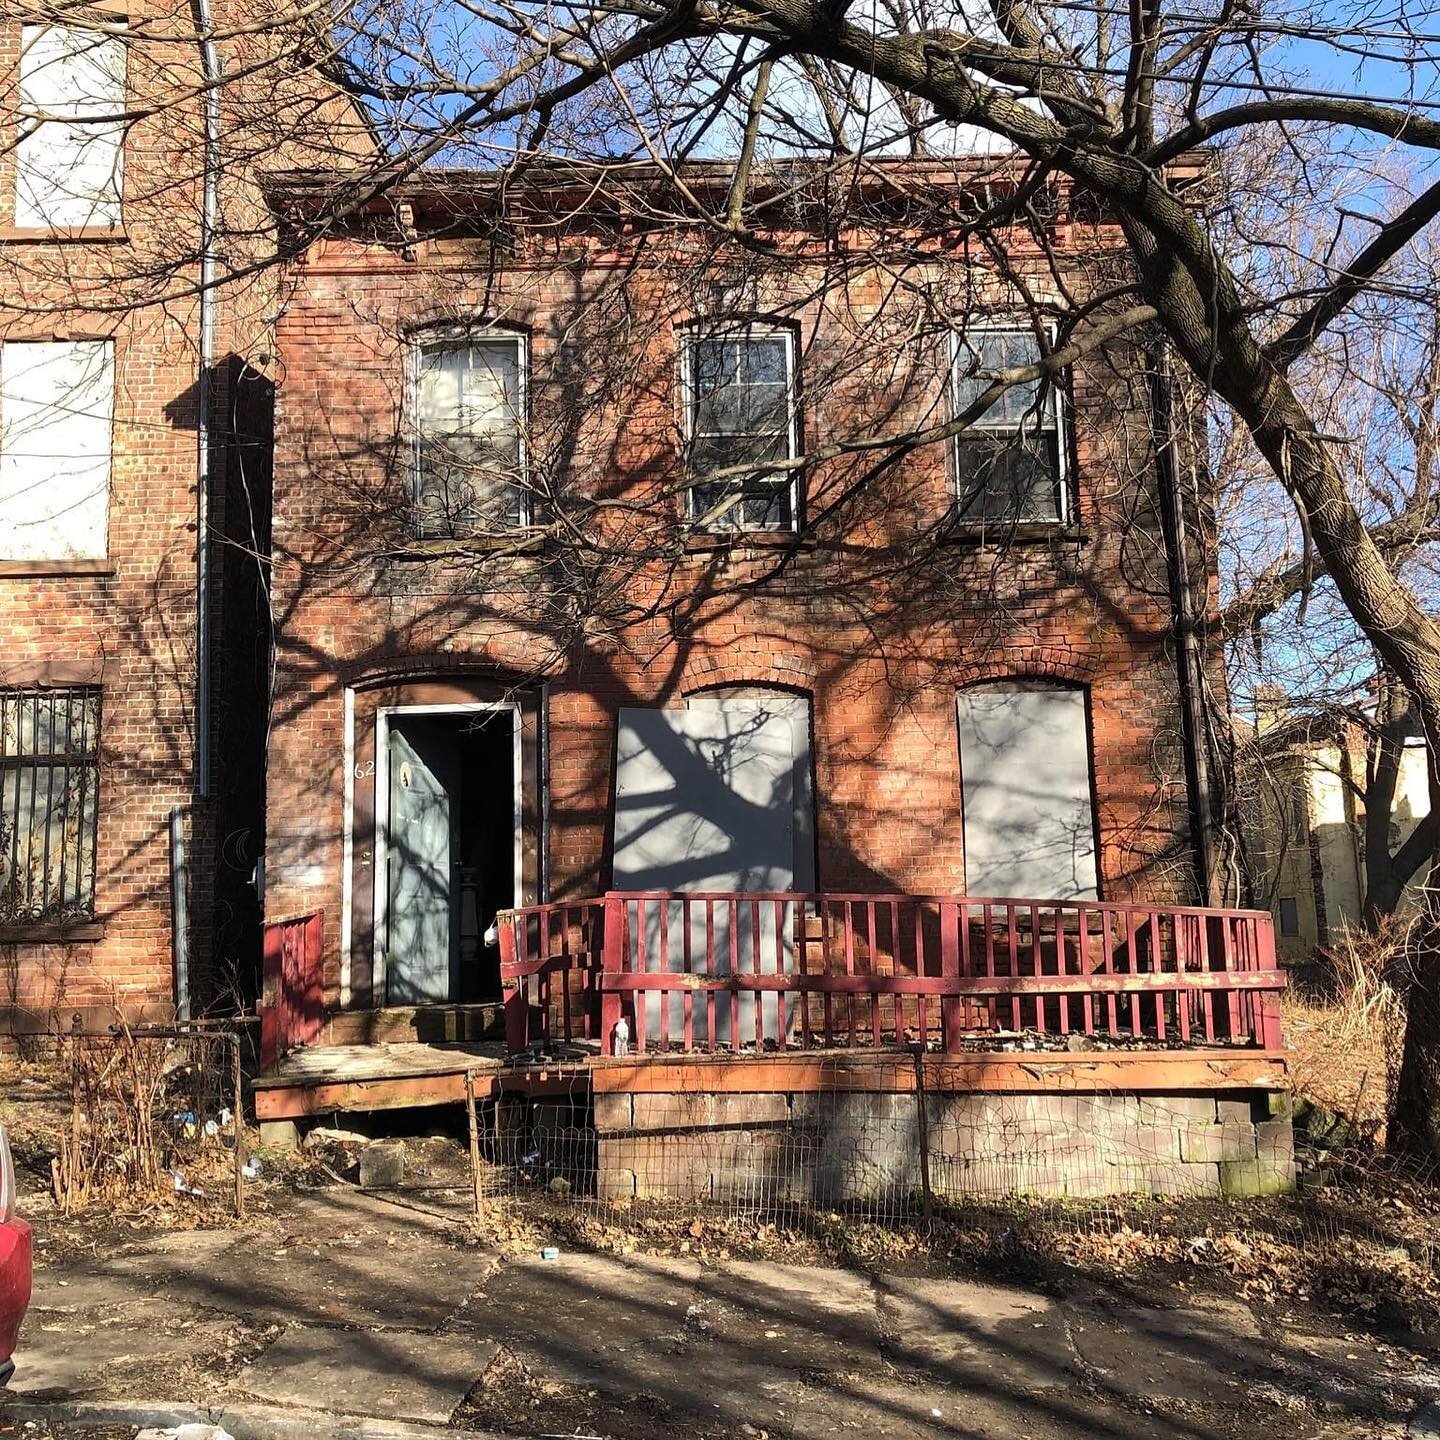 Save this sweet gem! NCLB has released a Request for Applications for the purchase and renovation of 62 Campbell St, a 2 story single family home.  Applications are due August 31, 2020.  See our website for details. 
https://www.newburghcommunityland